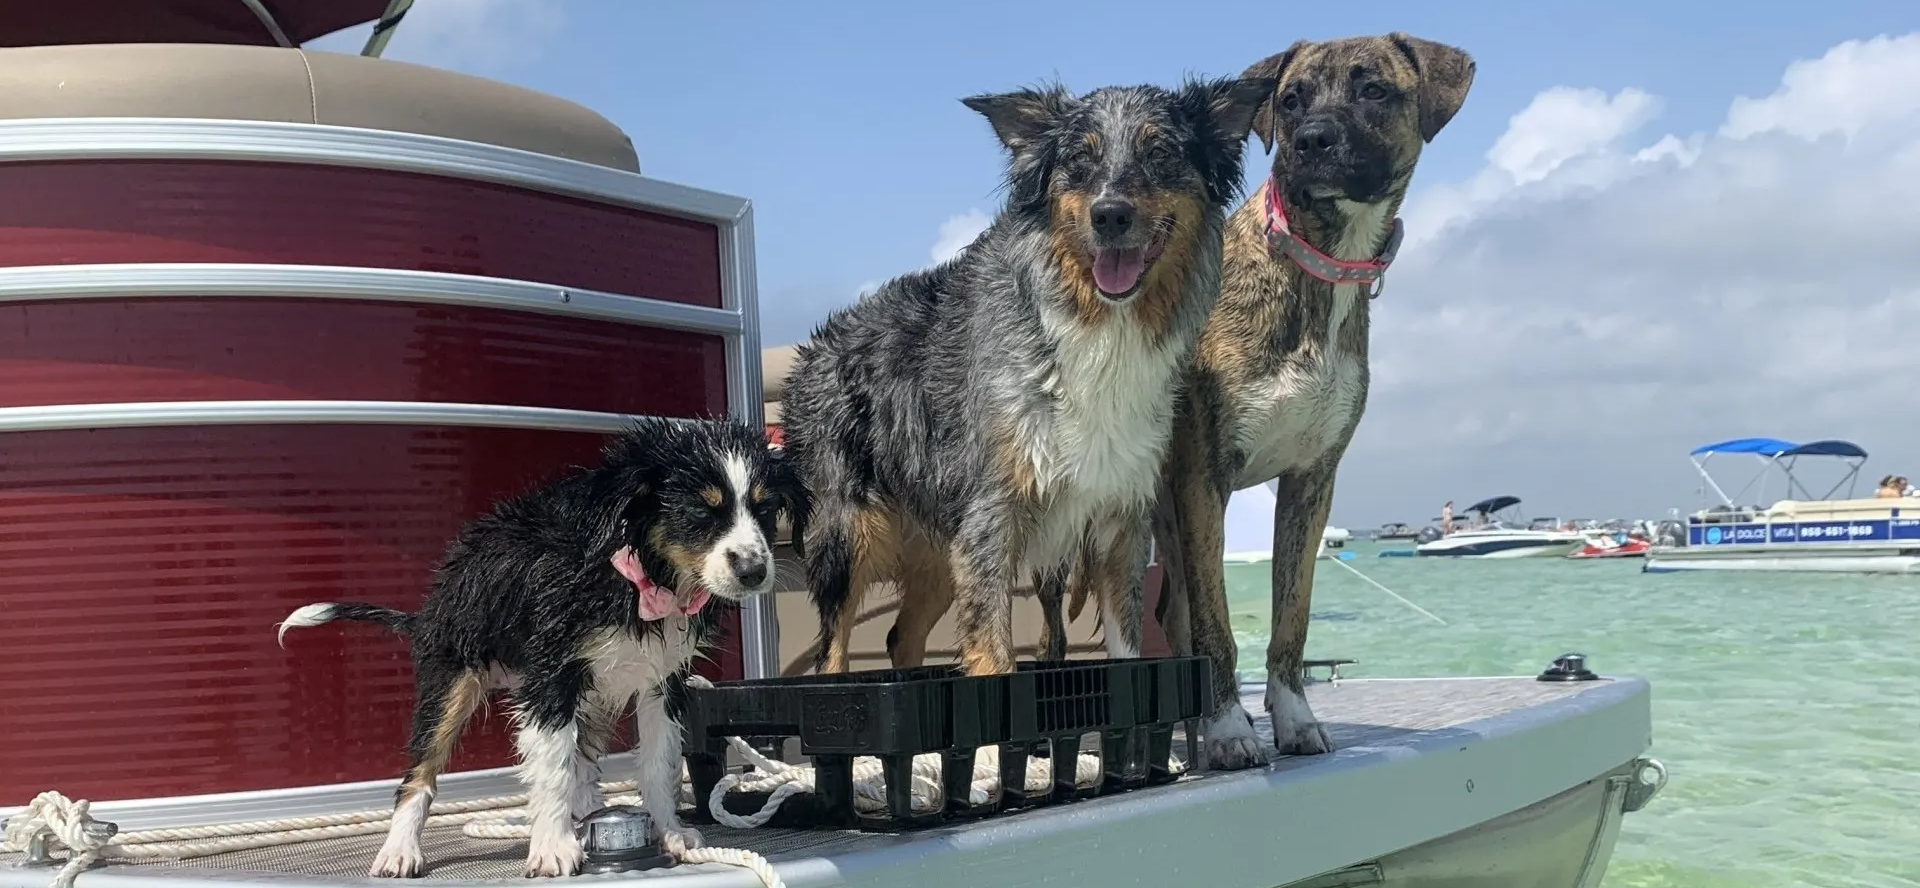 3 wet dogs standing at the back of a pontoon boat